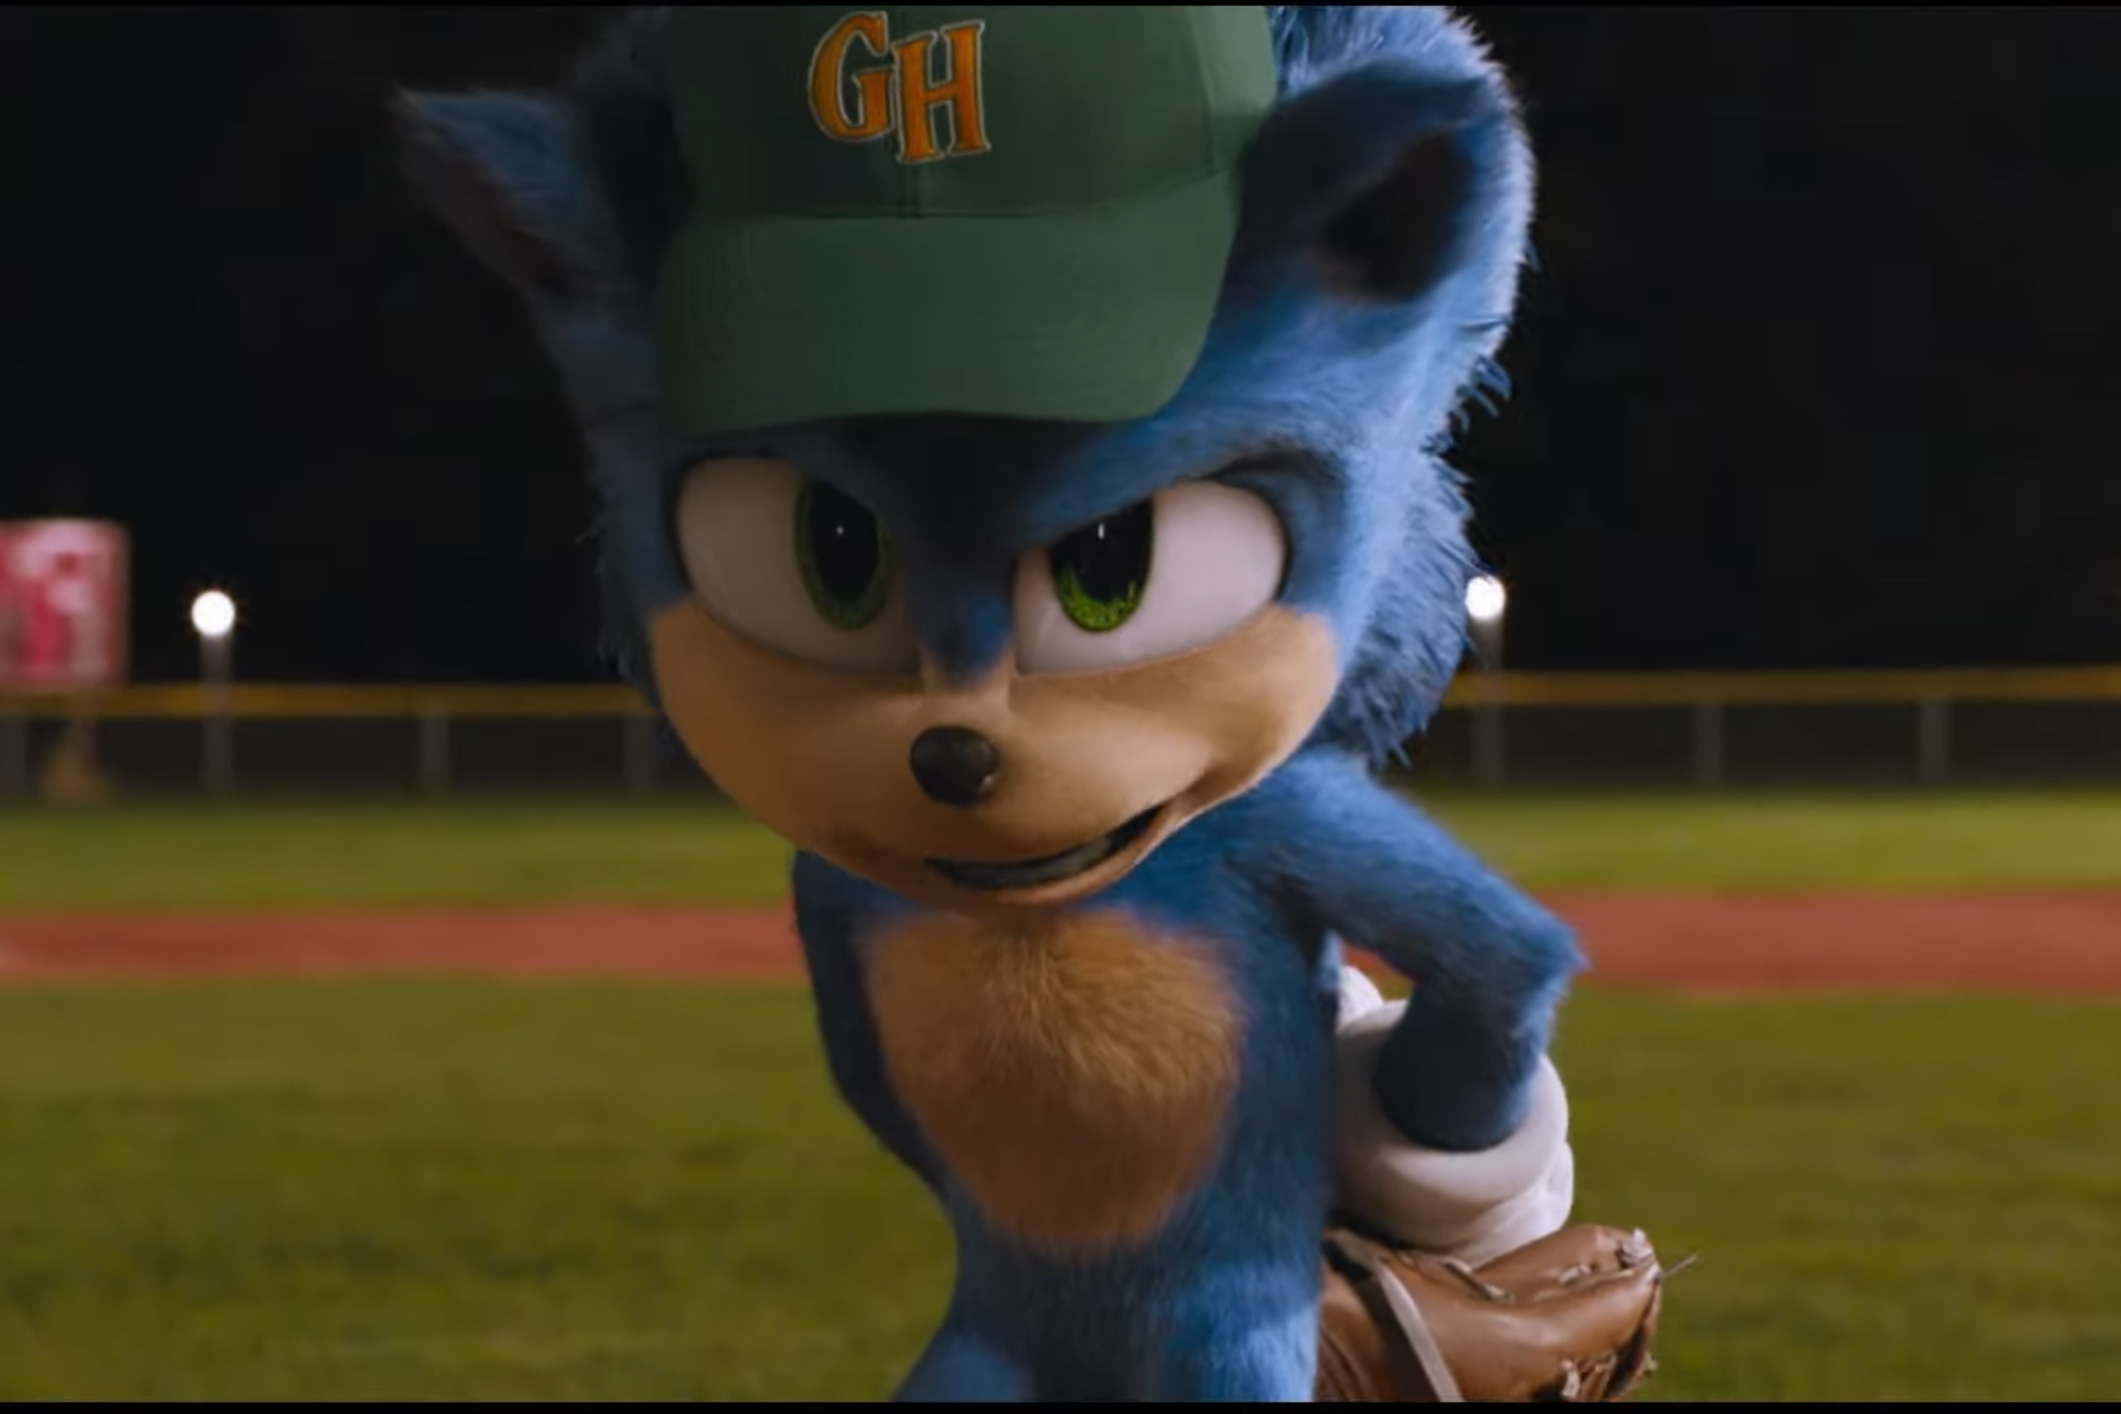 SONIC THE HEDGEHOG 3 – TEASER TRAILER (2024) Paramount Pictures